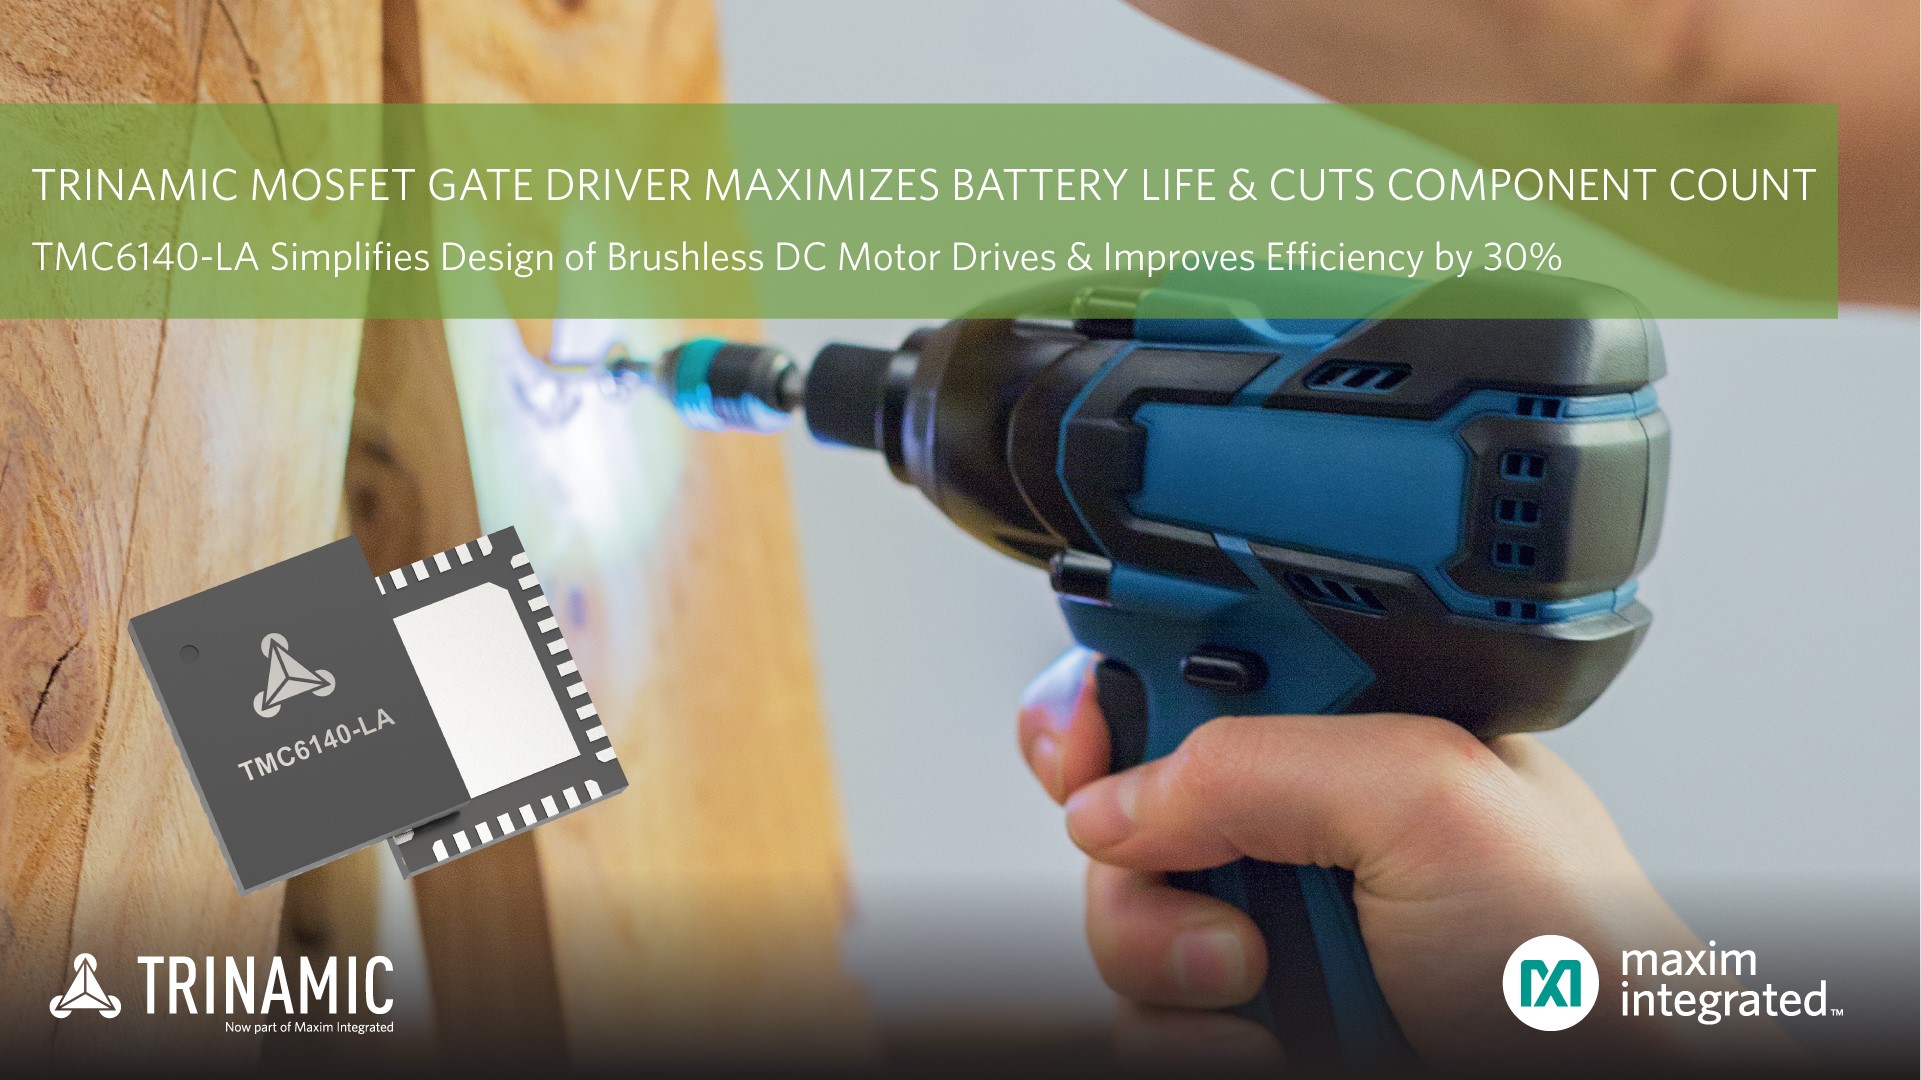 3-Phase MOSFET Gate Driver Maximizes Battery Life